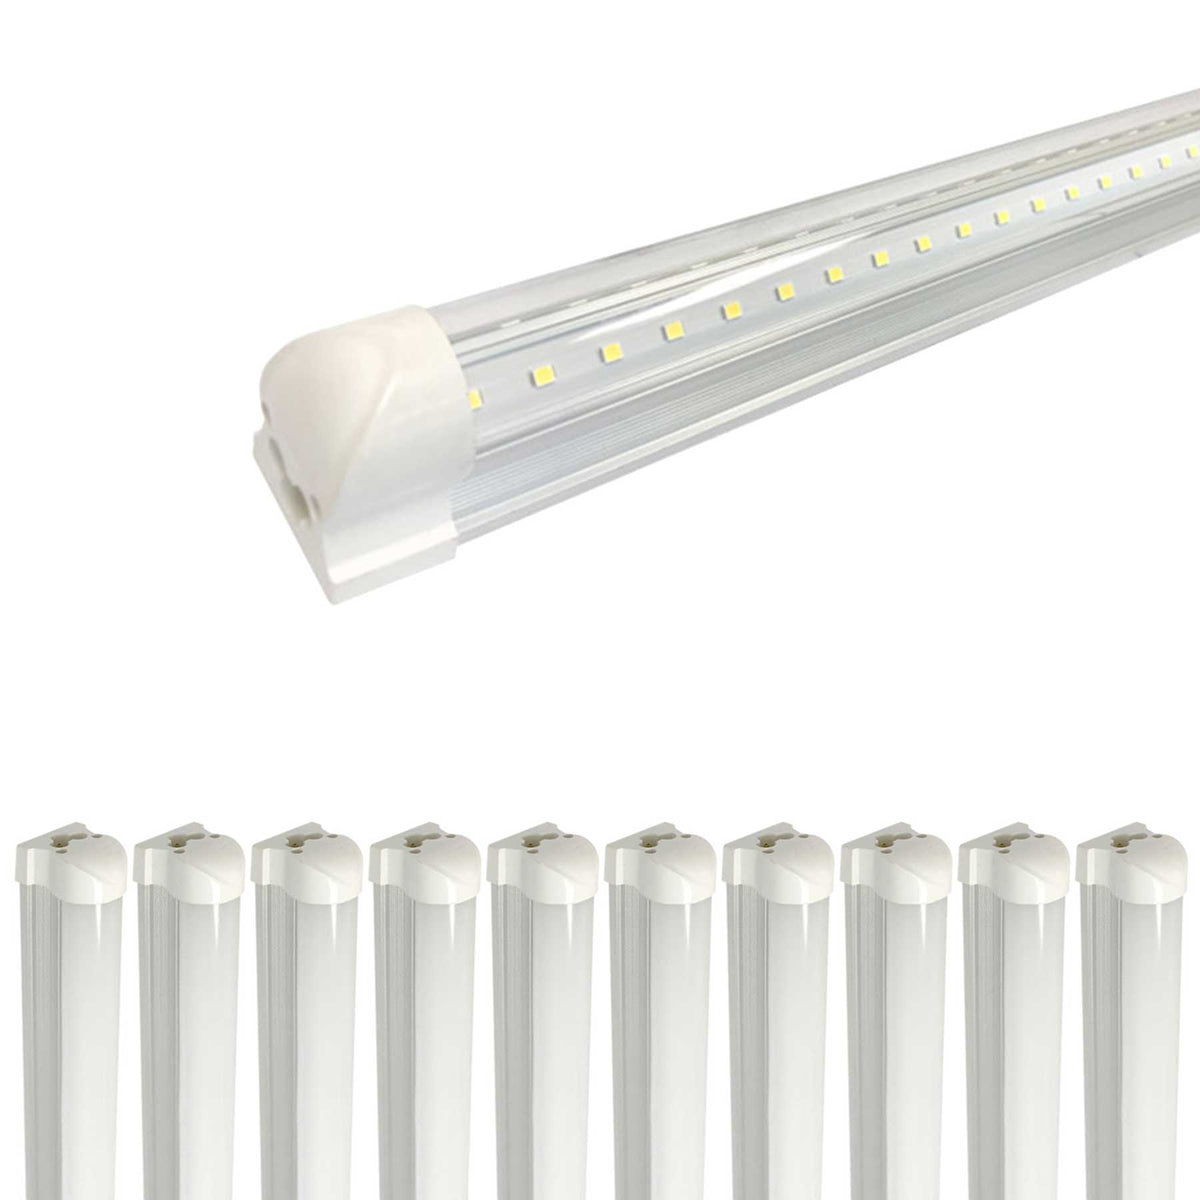 Picture of Viribright 519021 6000K 96 in. 60W Tube LED Tubular Bulb, Frosted - Pack of 10